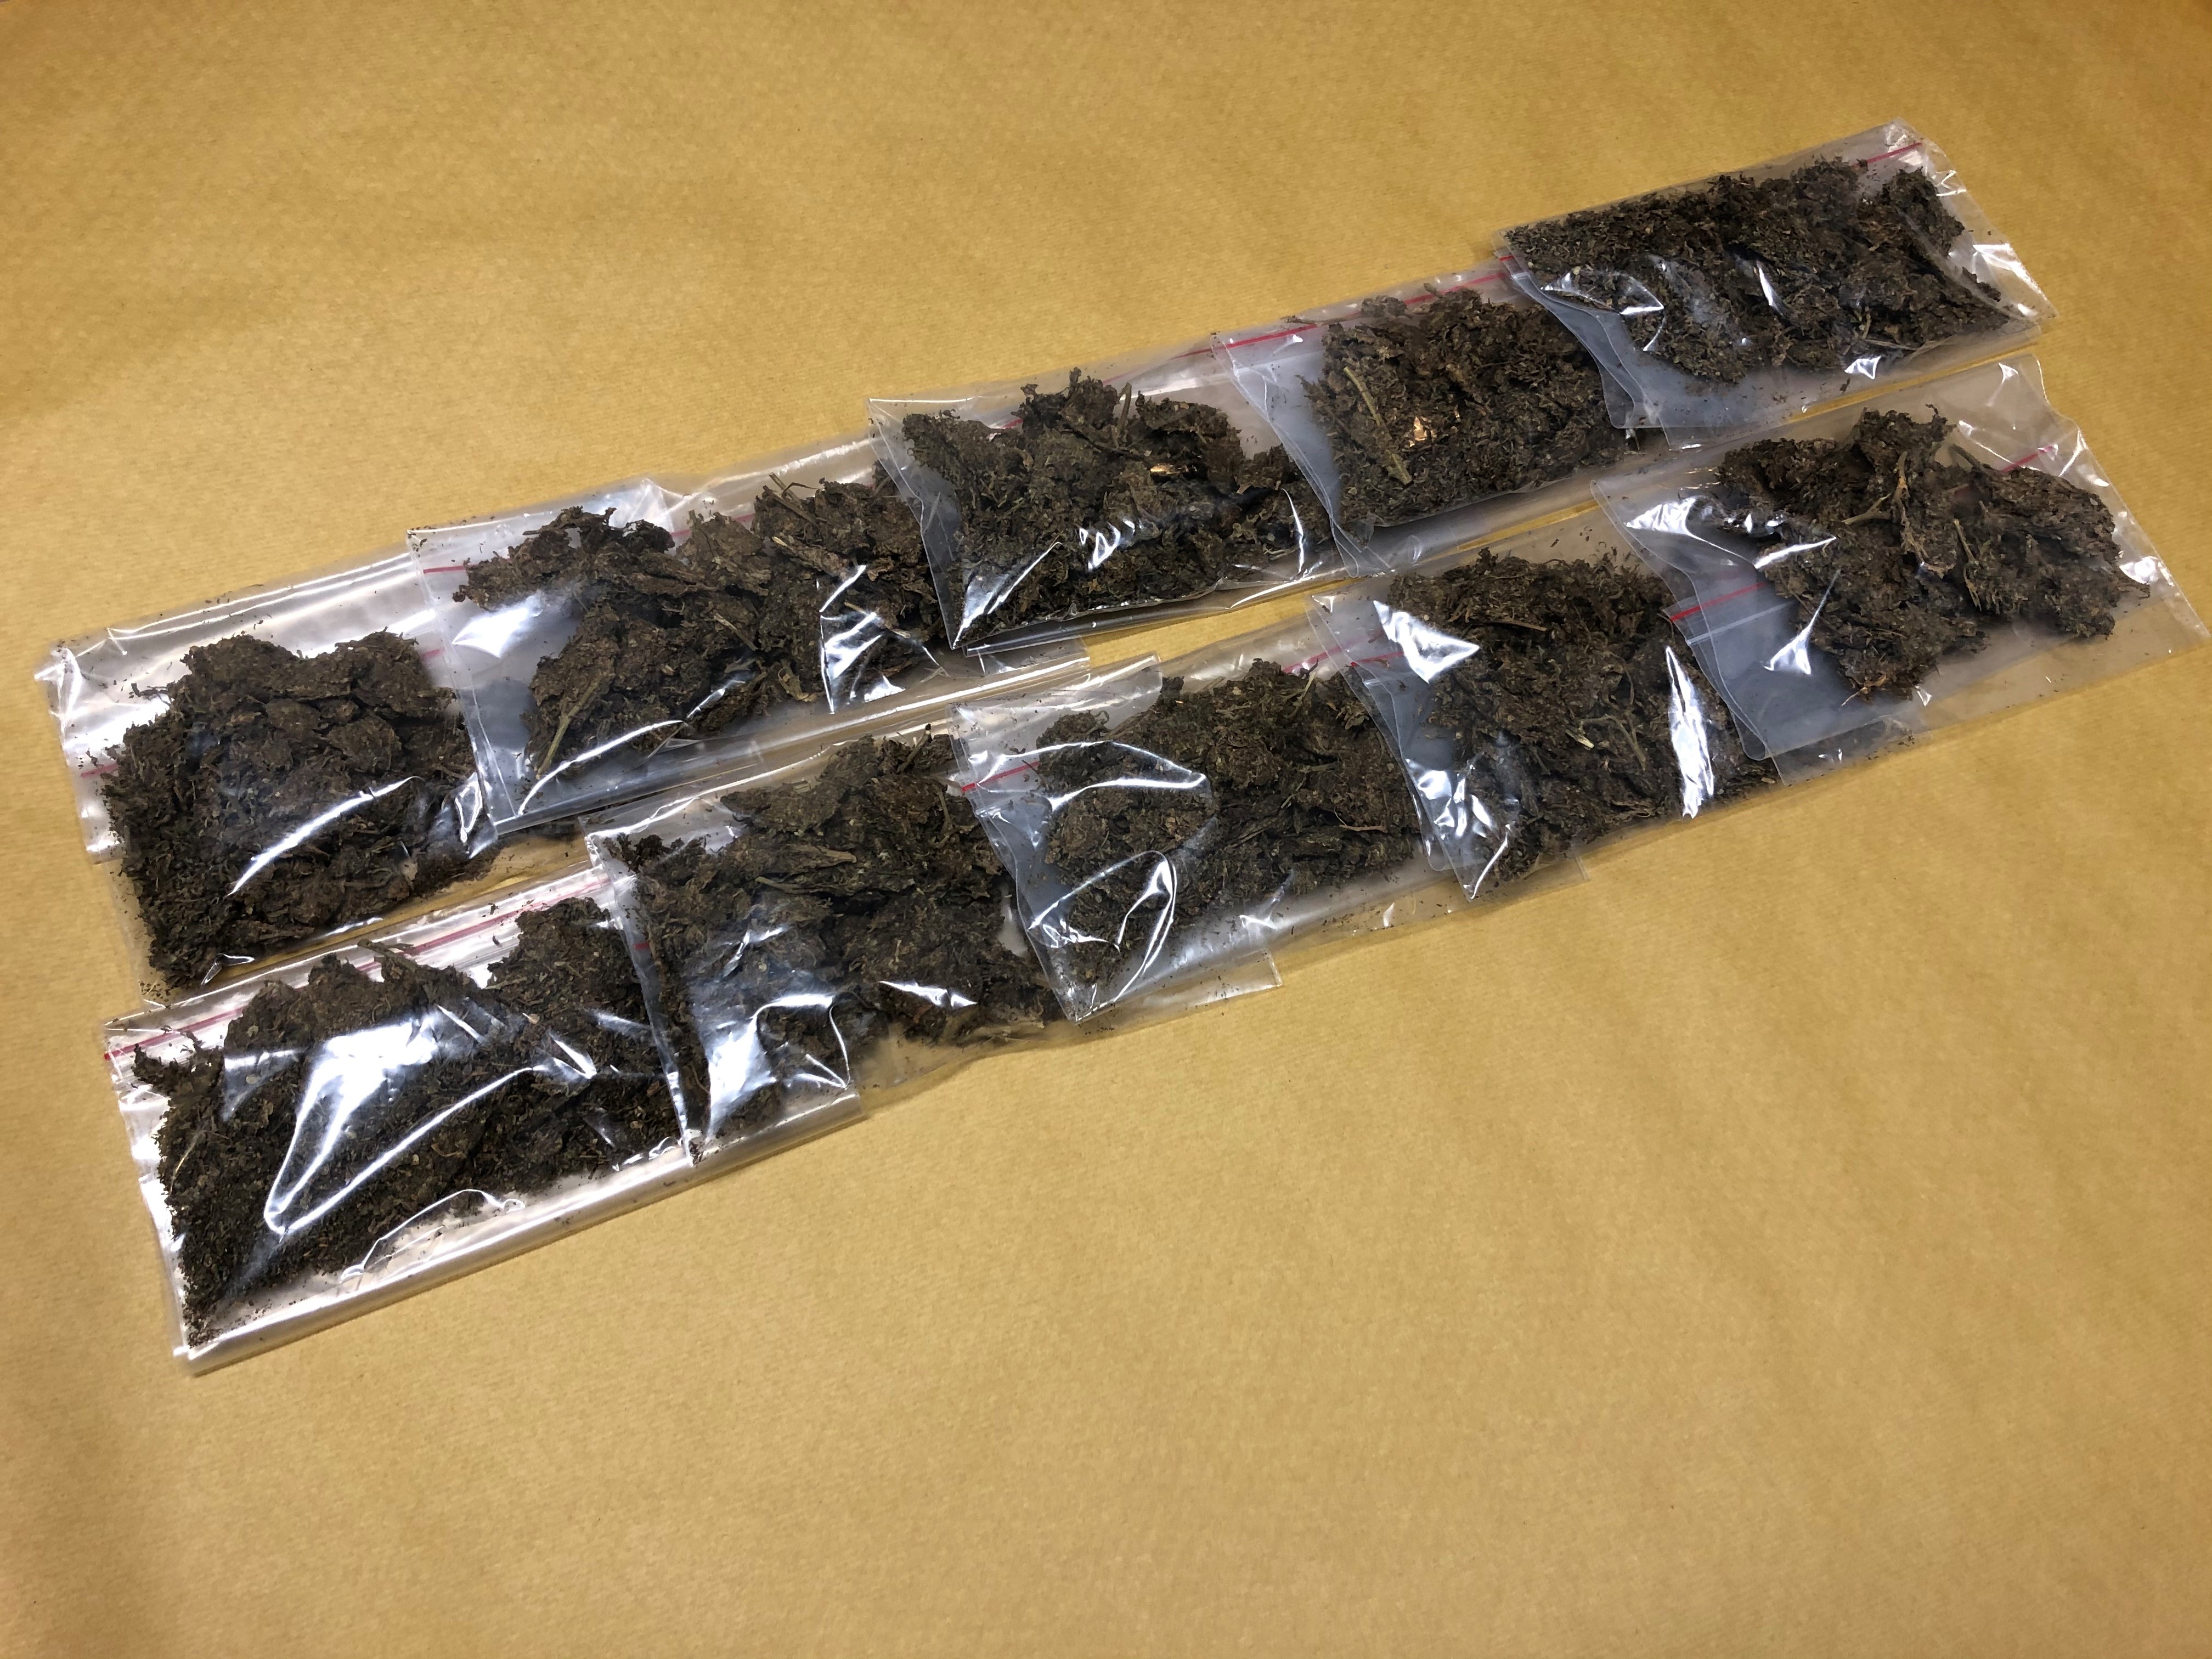 Photo 2: Ten packets containing about 524g of cannabis seized from a unit in the vicinity of Anchorvale Road.